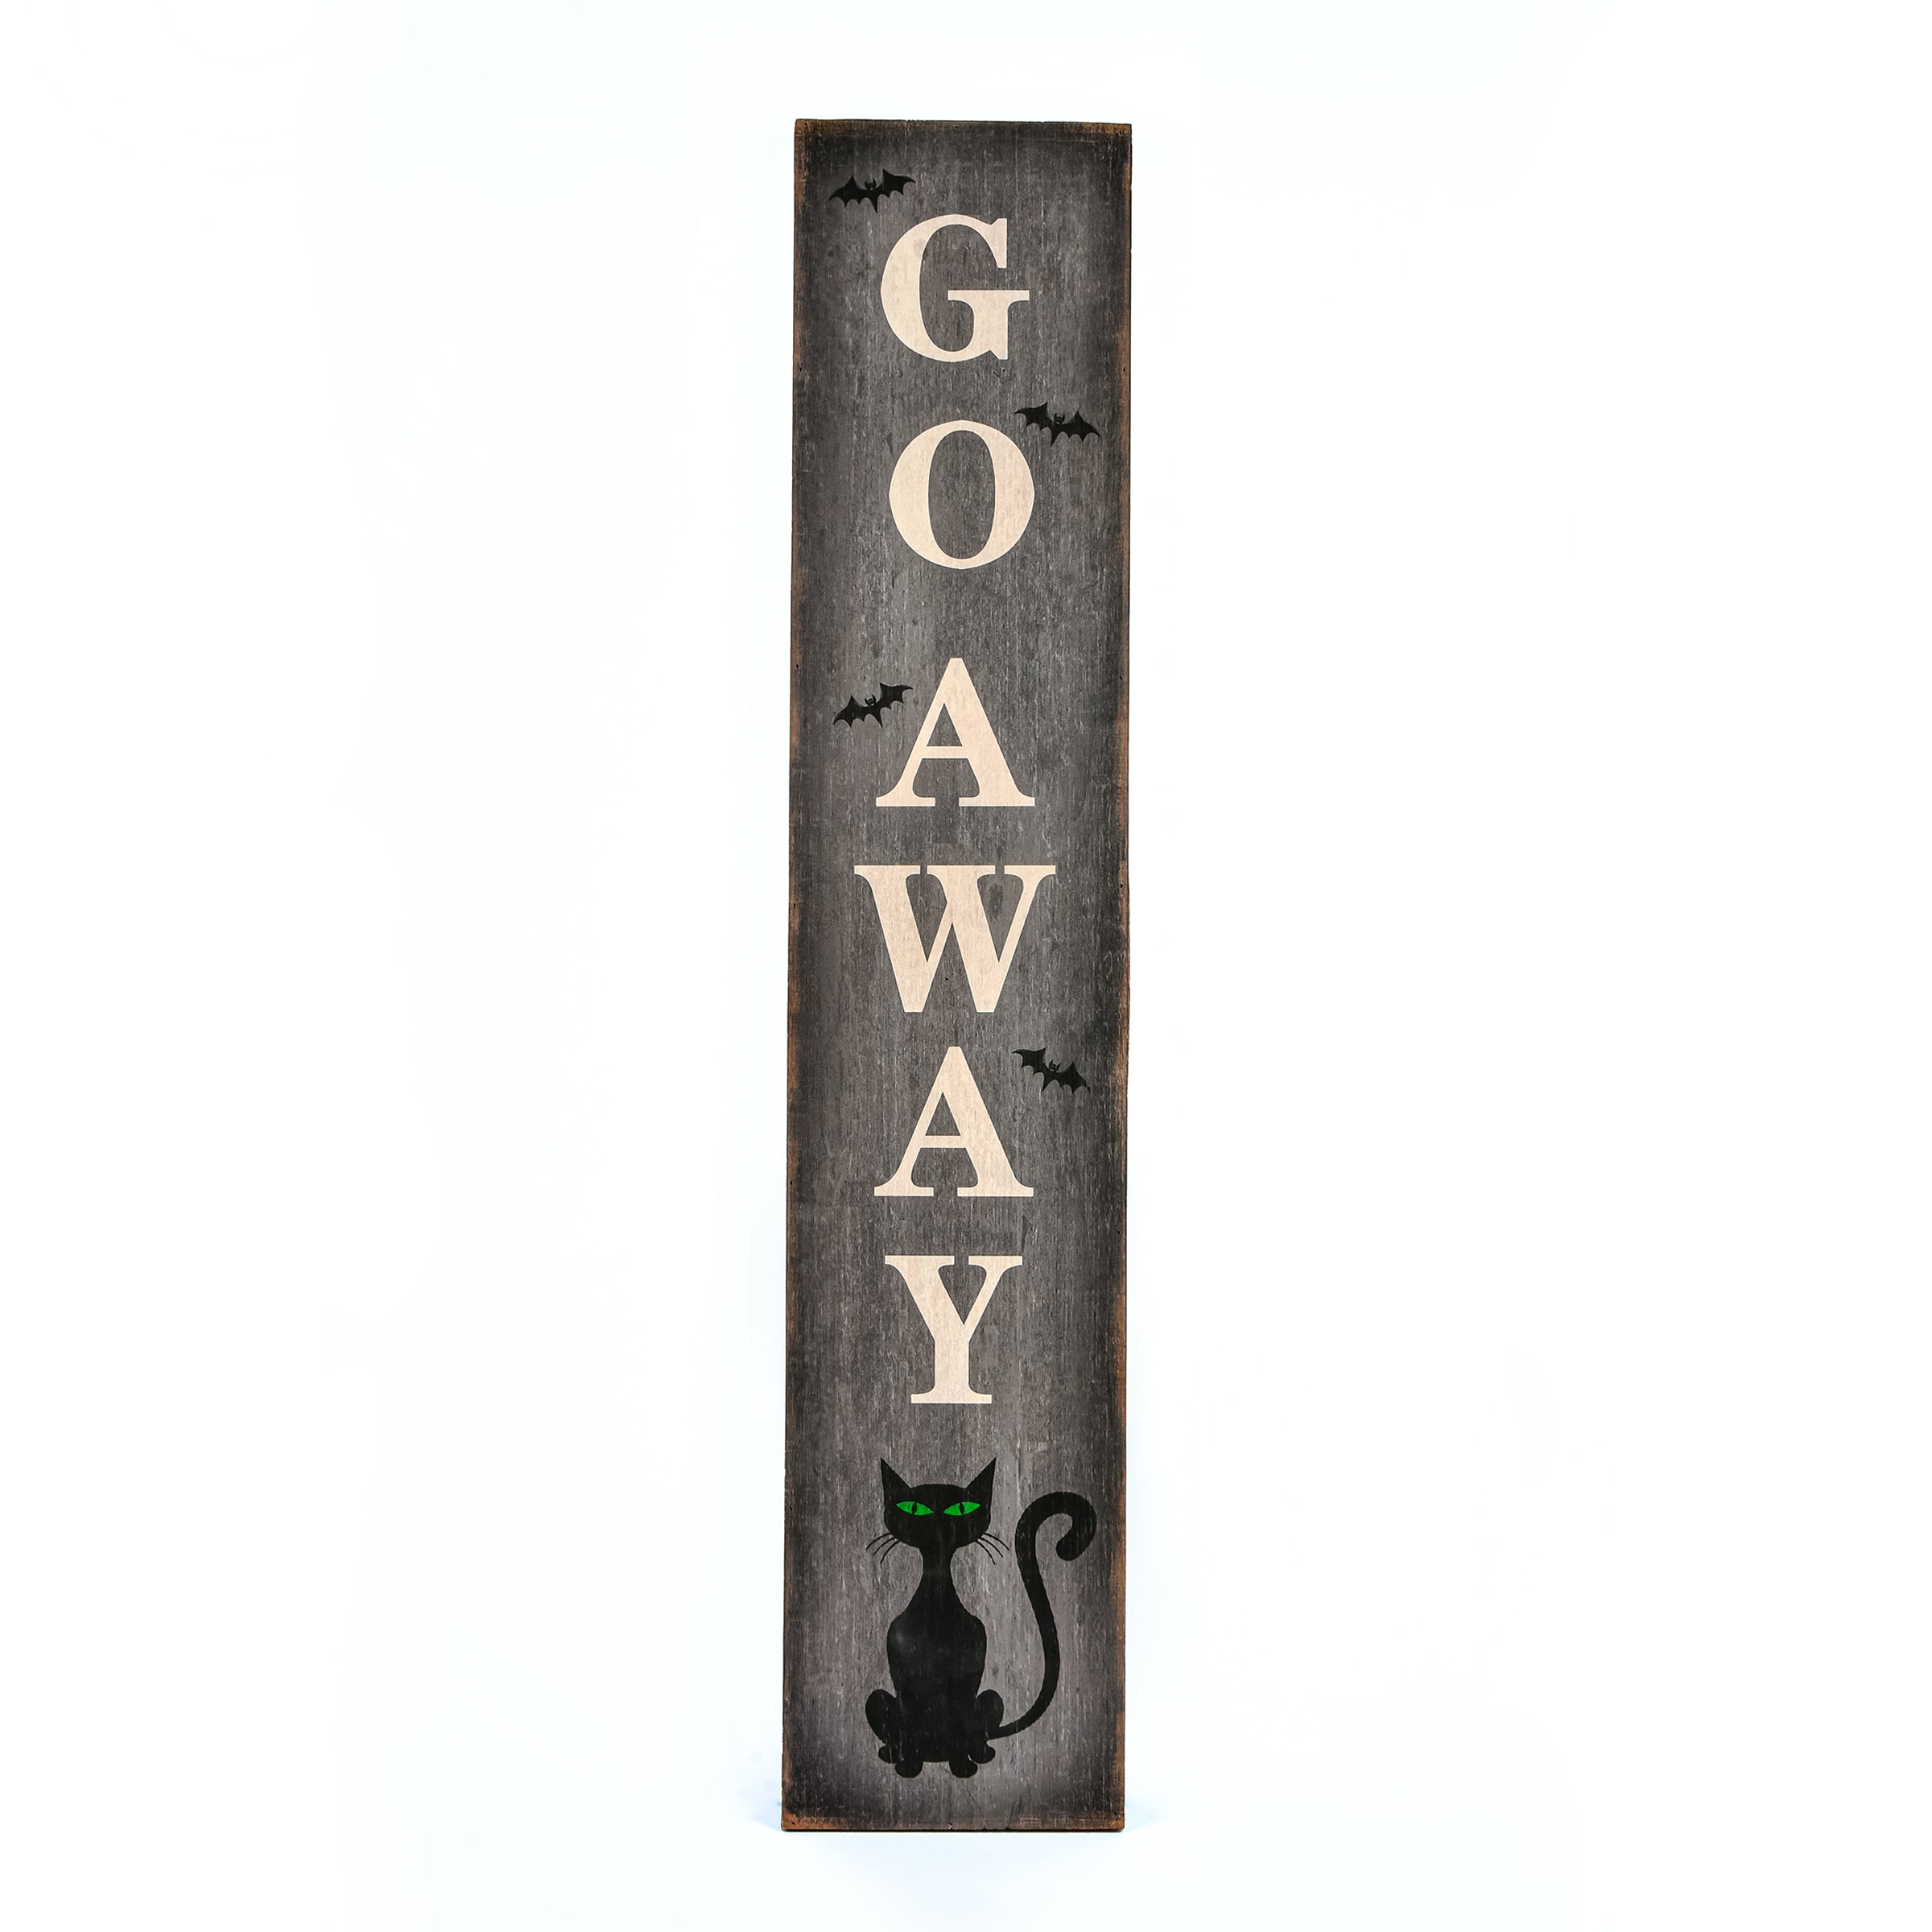 Halloween Hanging Porch Sign, Gray, 'Go Away', Wooden Construction, 39 Inches